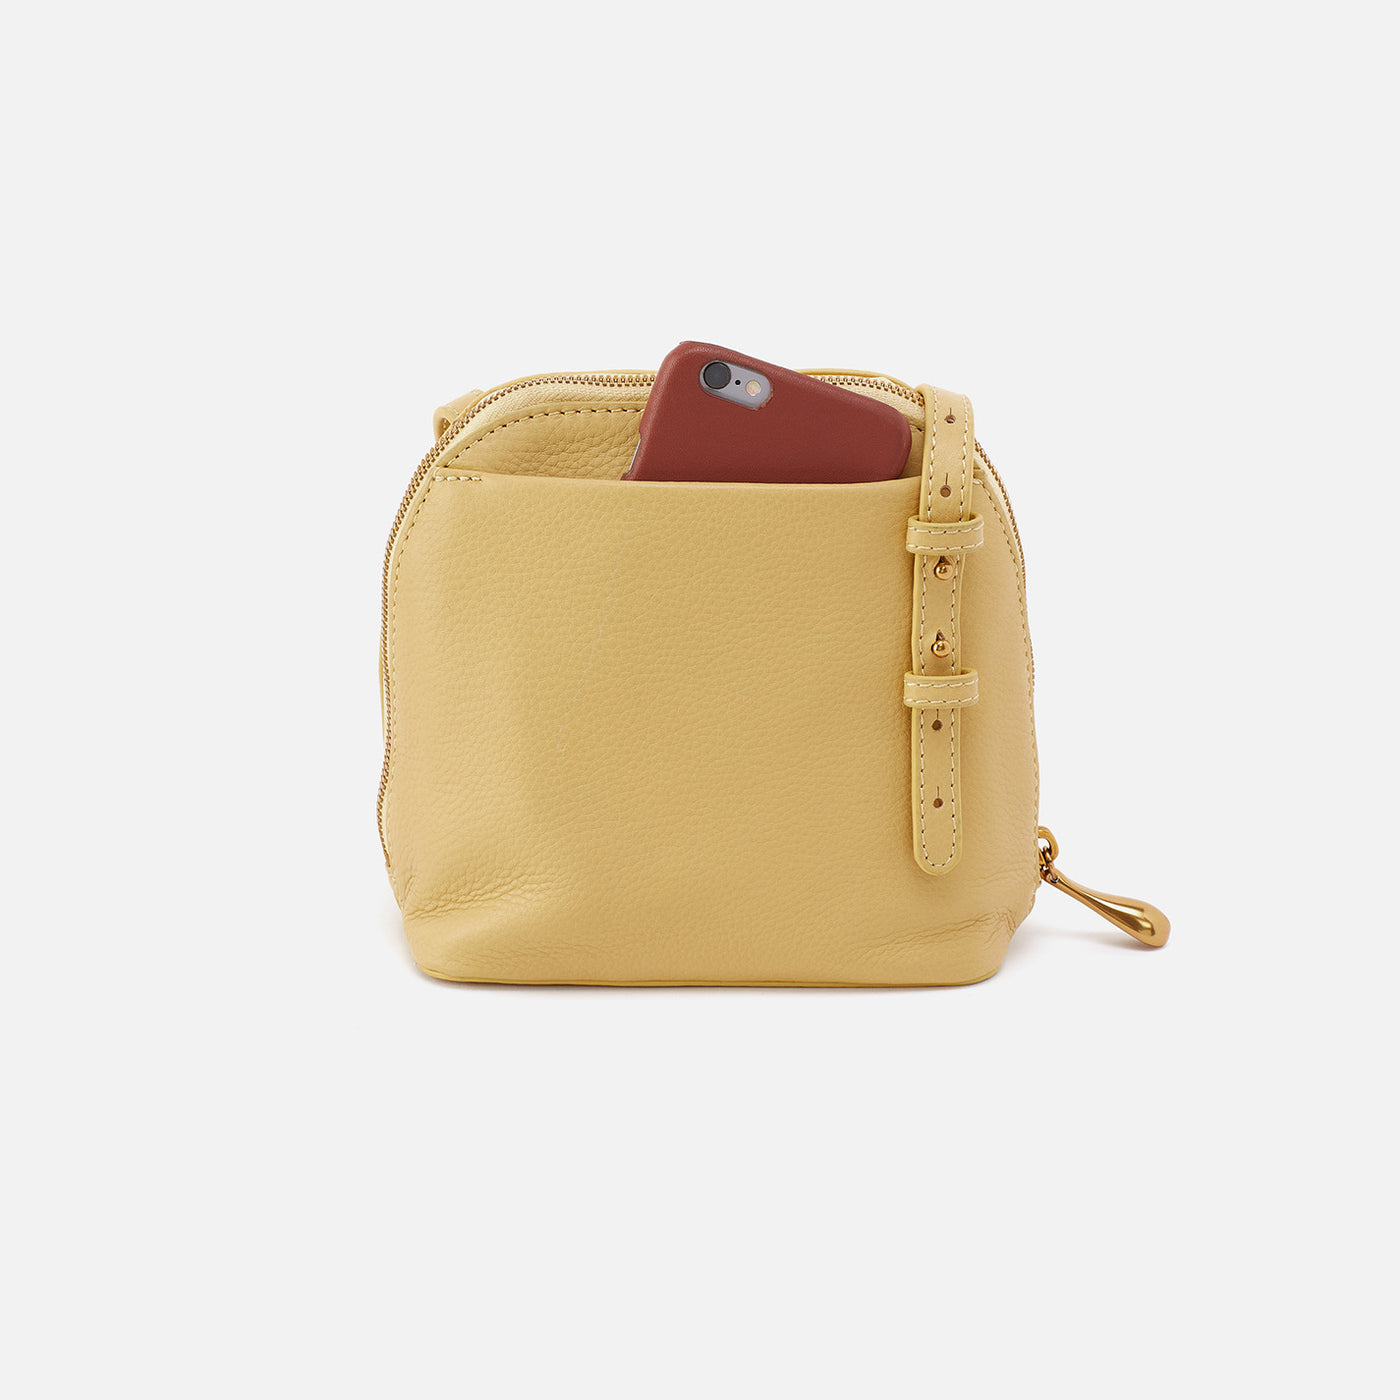 Nash Crossbody in Pebbled Leather - Flax